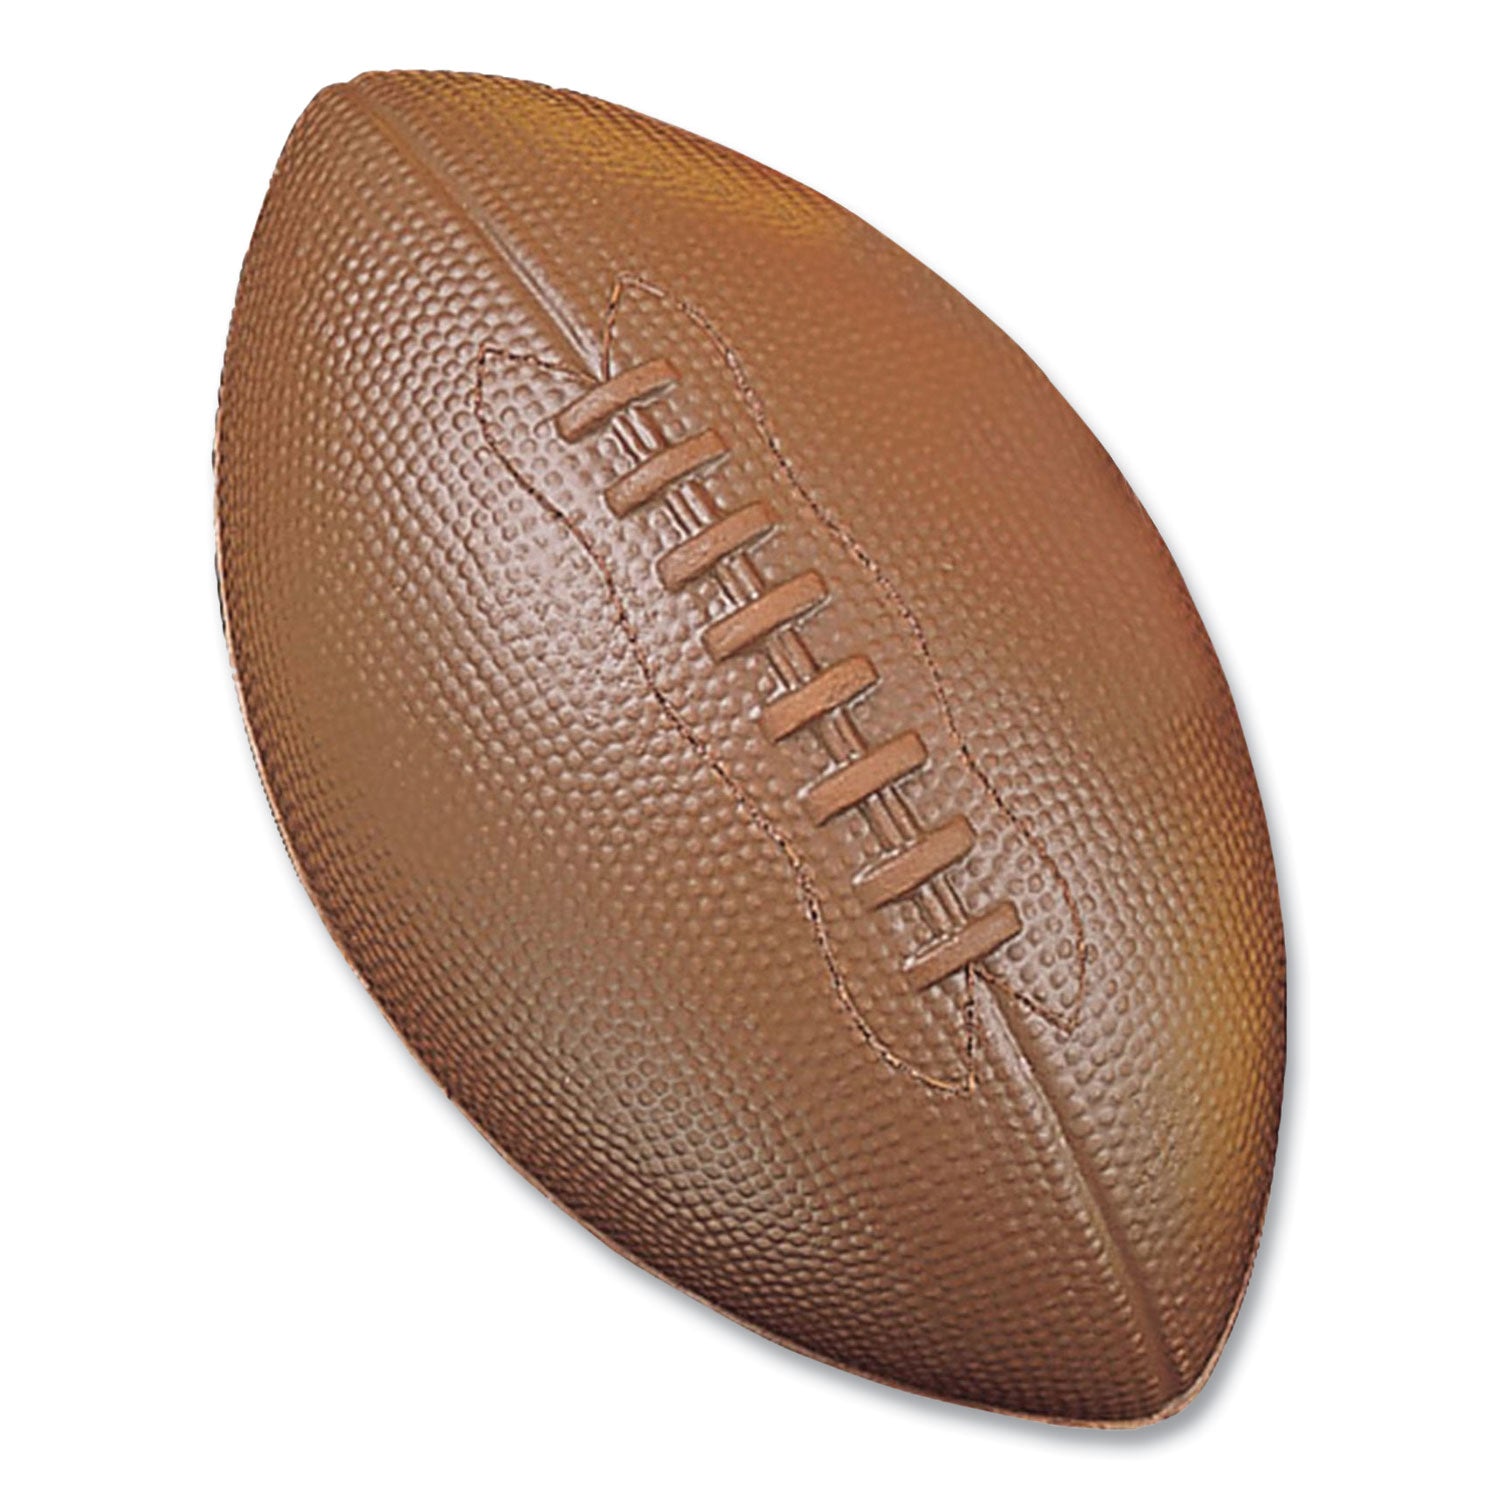 Coated Foam Sport Ball, For Football, Playground Size, Brown - 